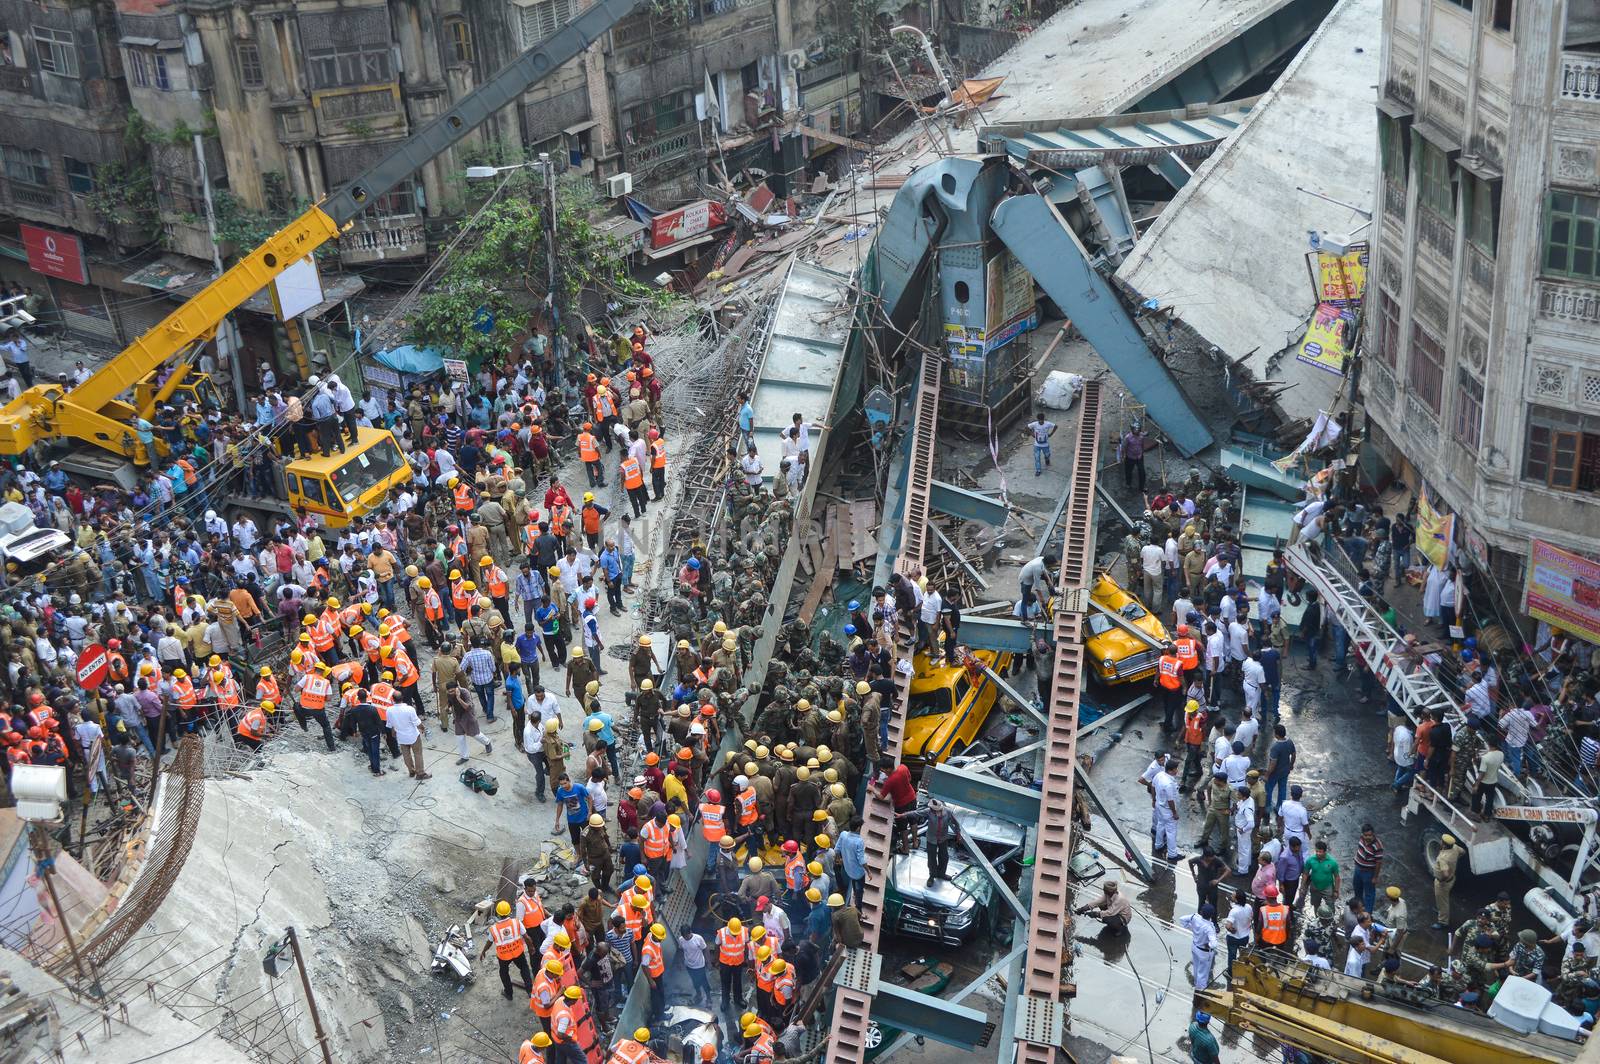 INDIA, Kolkata: Indian soldiers, rescue workers and volunteers try to free people trapped under the wreckage of a collapsed flyover bridge in Kolkata on March 31, 2016. At least 14 people were killed and dozens more injured when a flyover collapsed in a busy Indian city on March 31, an official said, as emergency workers battled to rescue people trapped under the rubble.